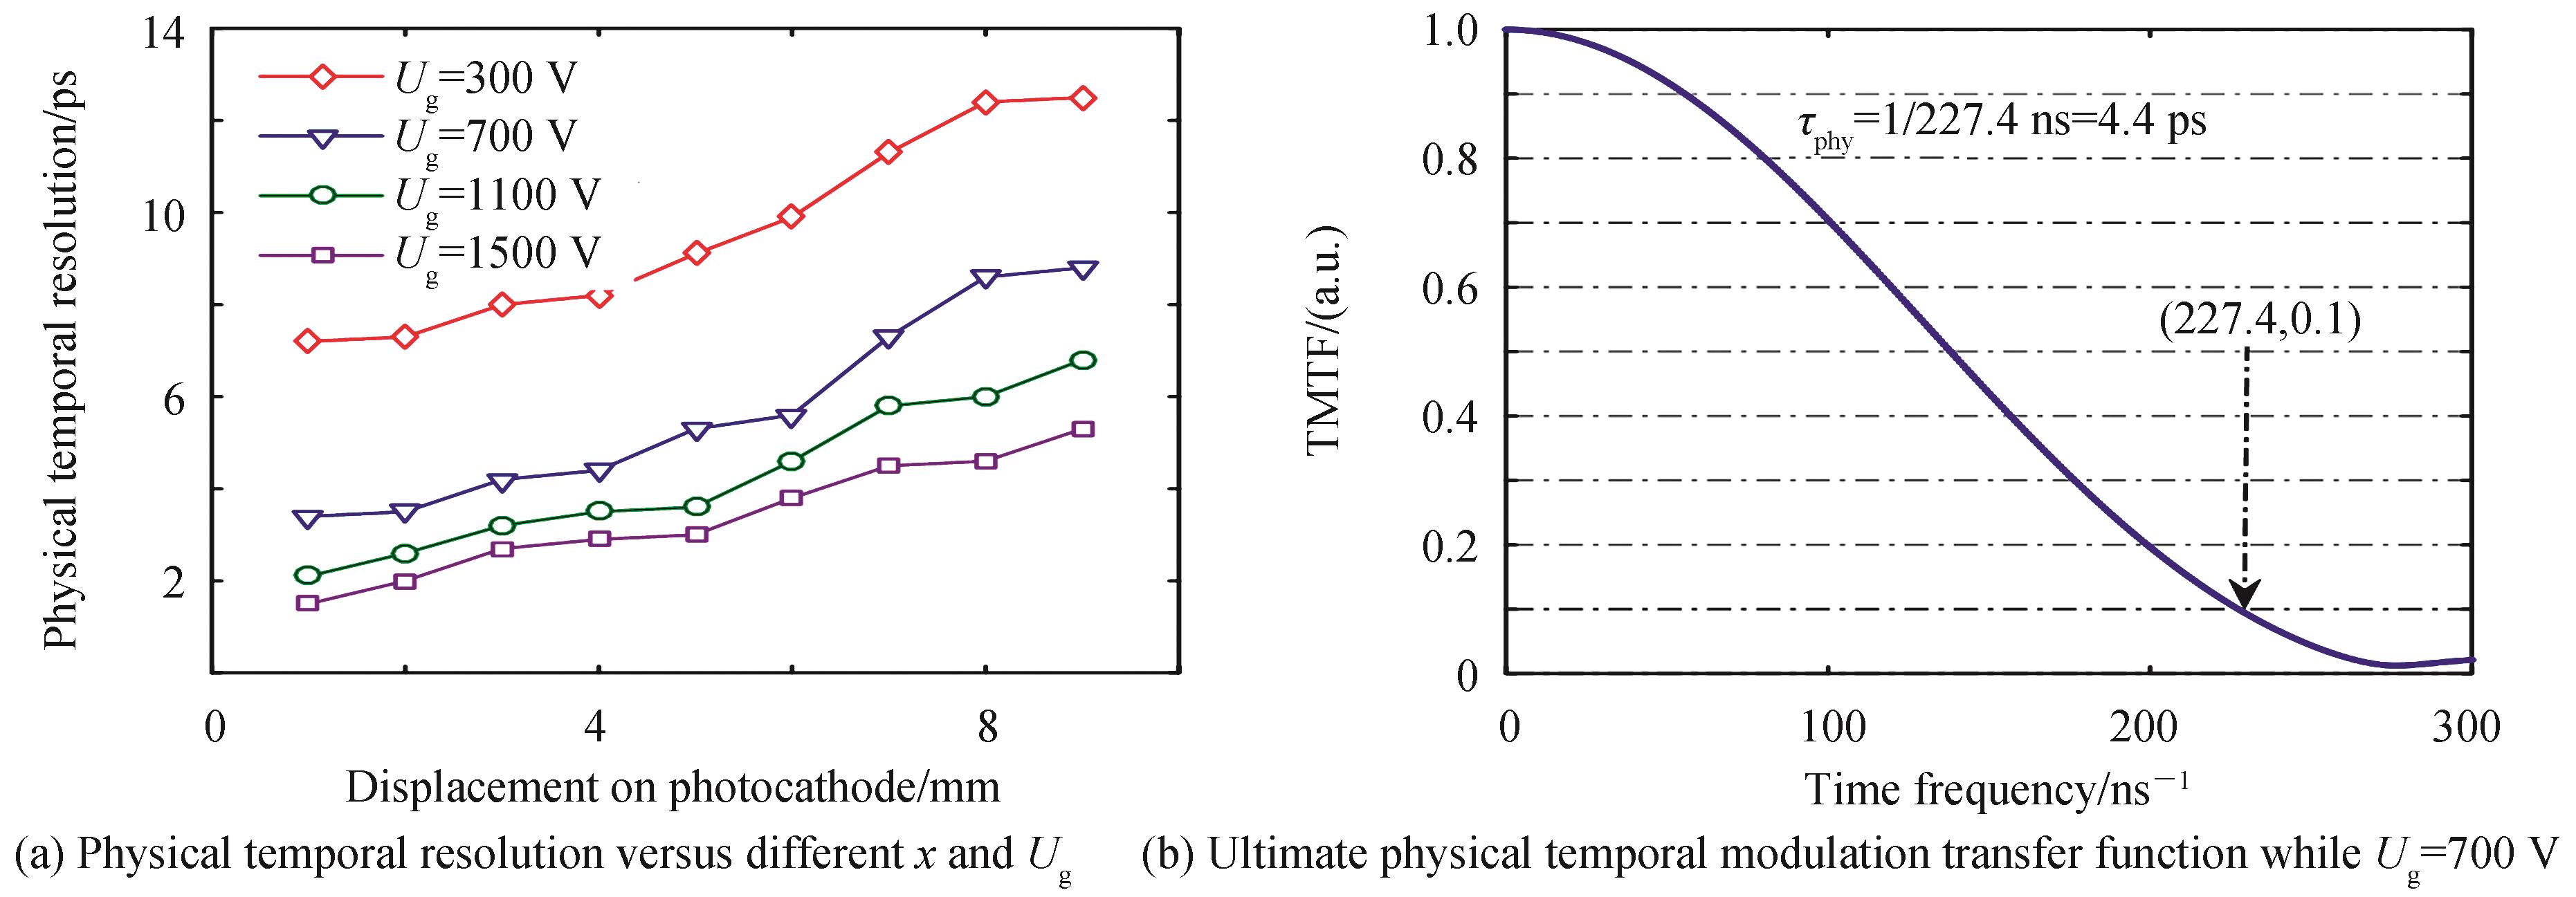 Physical temporal resolution